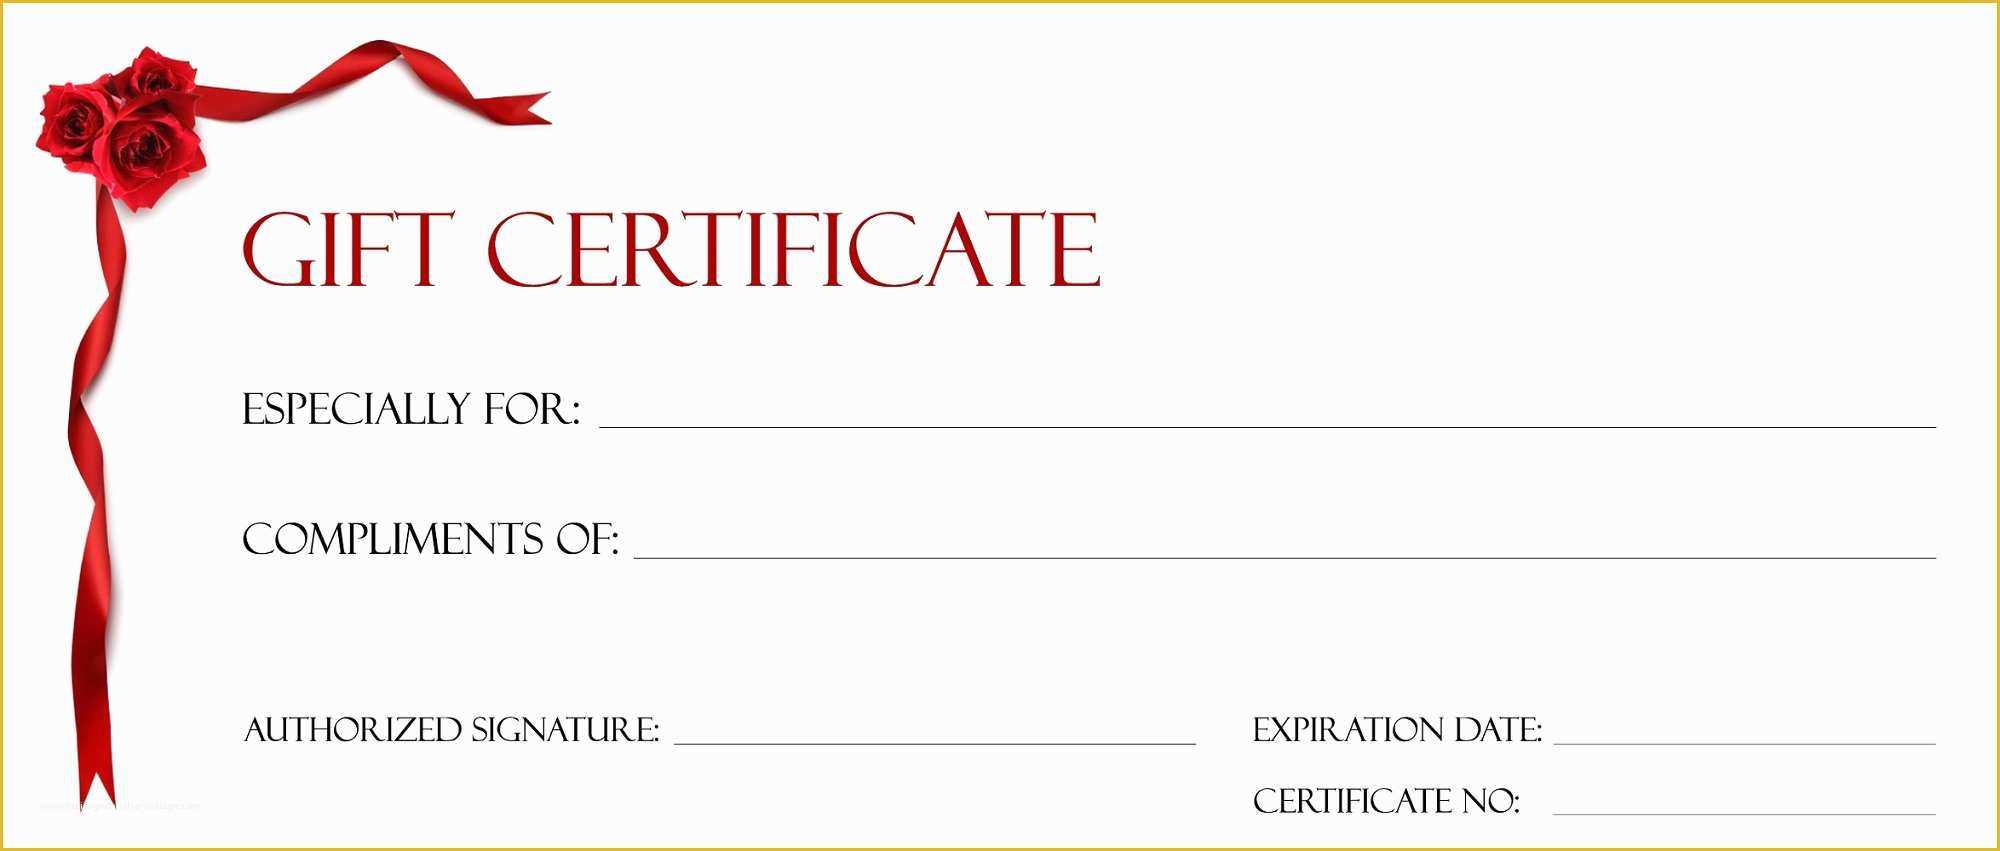 032 Word Certificate Template Download Free Printable Gift For Microsoft Gift Certificate Template Free Word